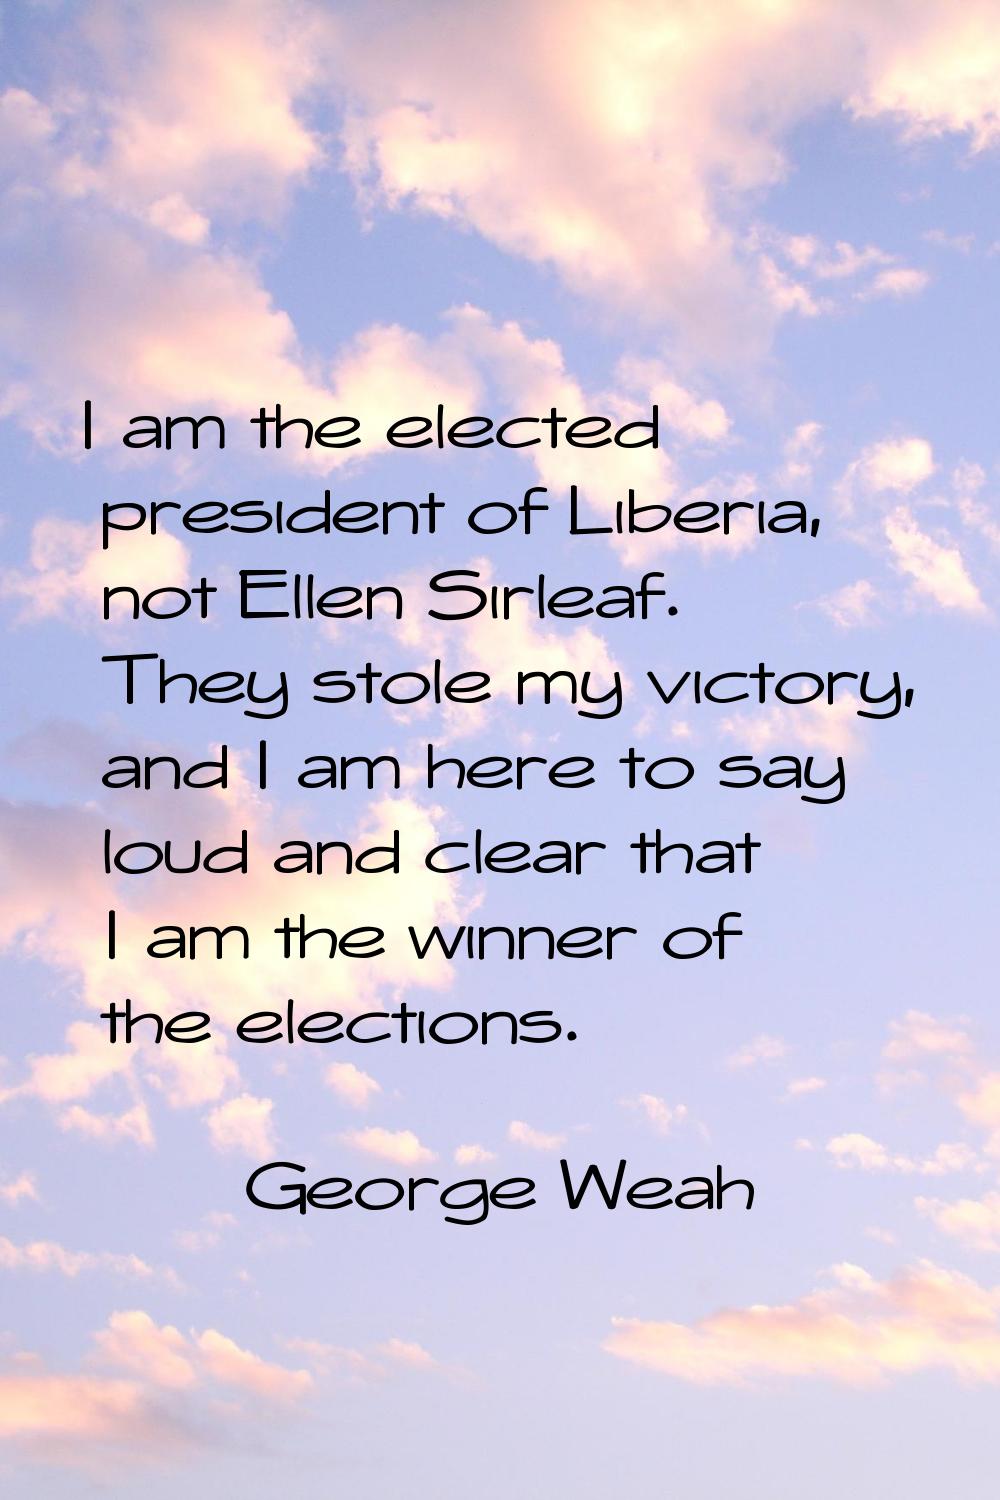 I am the elected president of Liberia, not Ellen Sirleaf. They stole my victory, and I am here to s